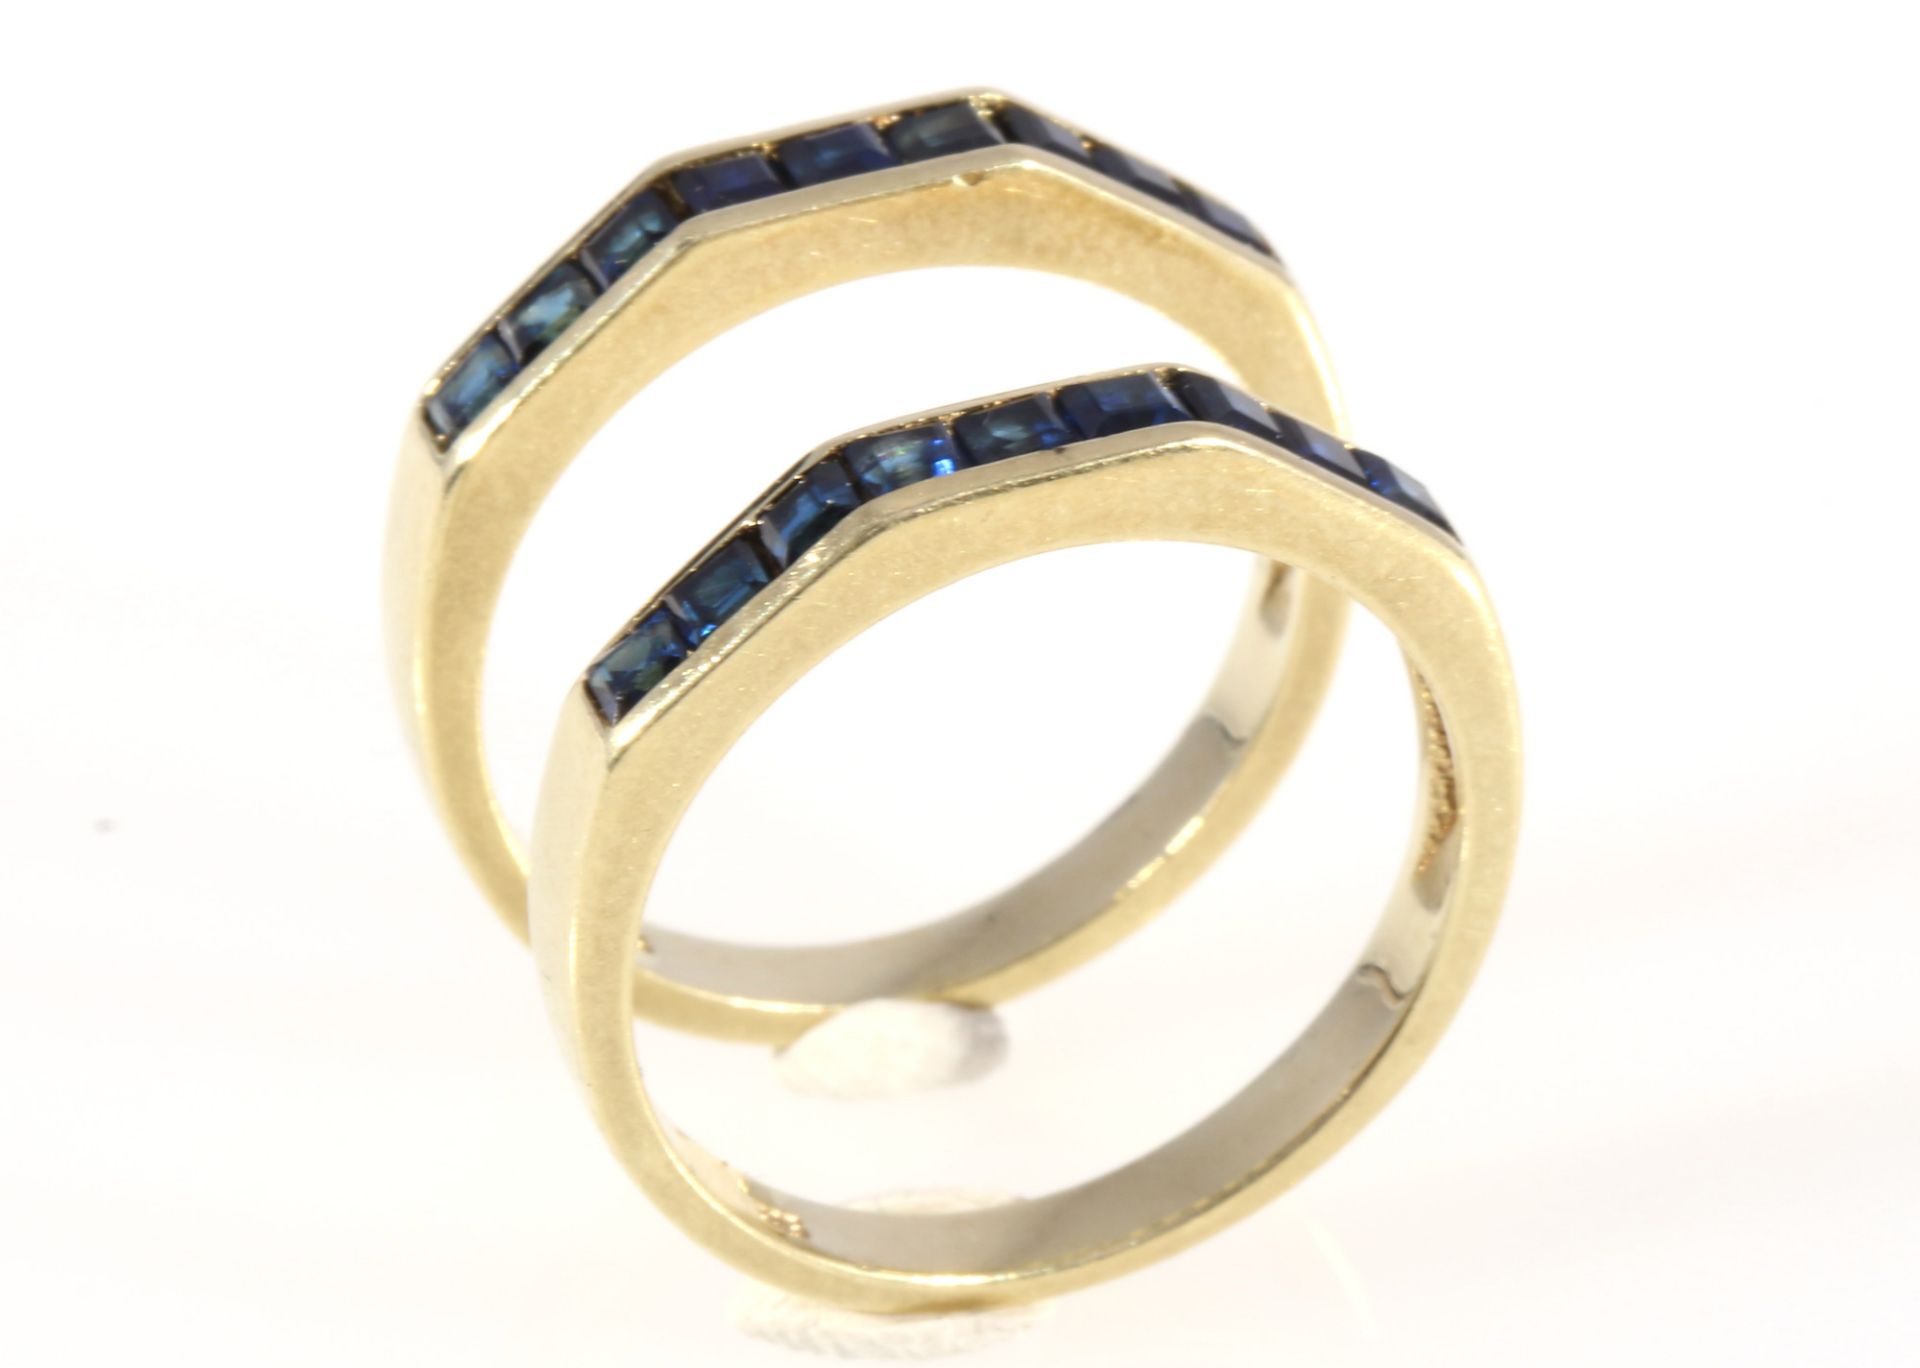 585 gold 2 rings with sapphires, 14K Gold 2 Ringe mit Saphiren, - Image 2 of 5